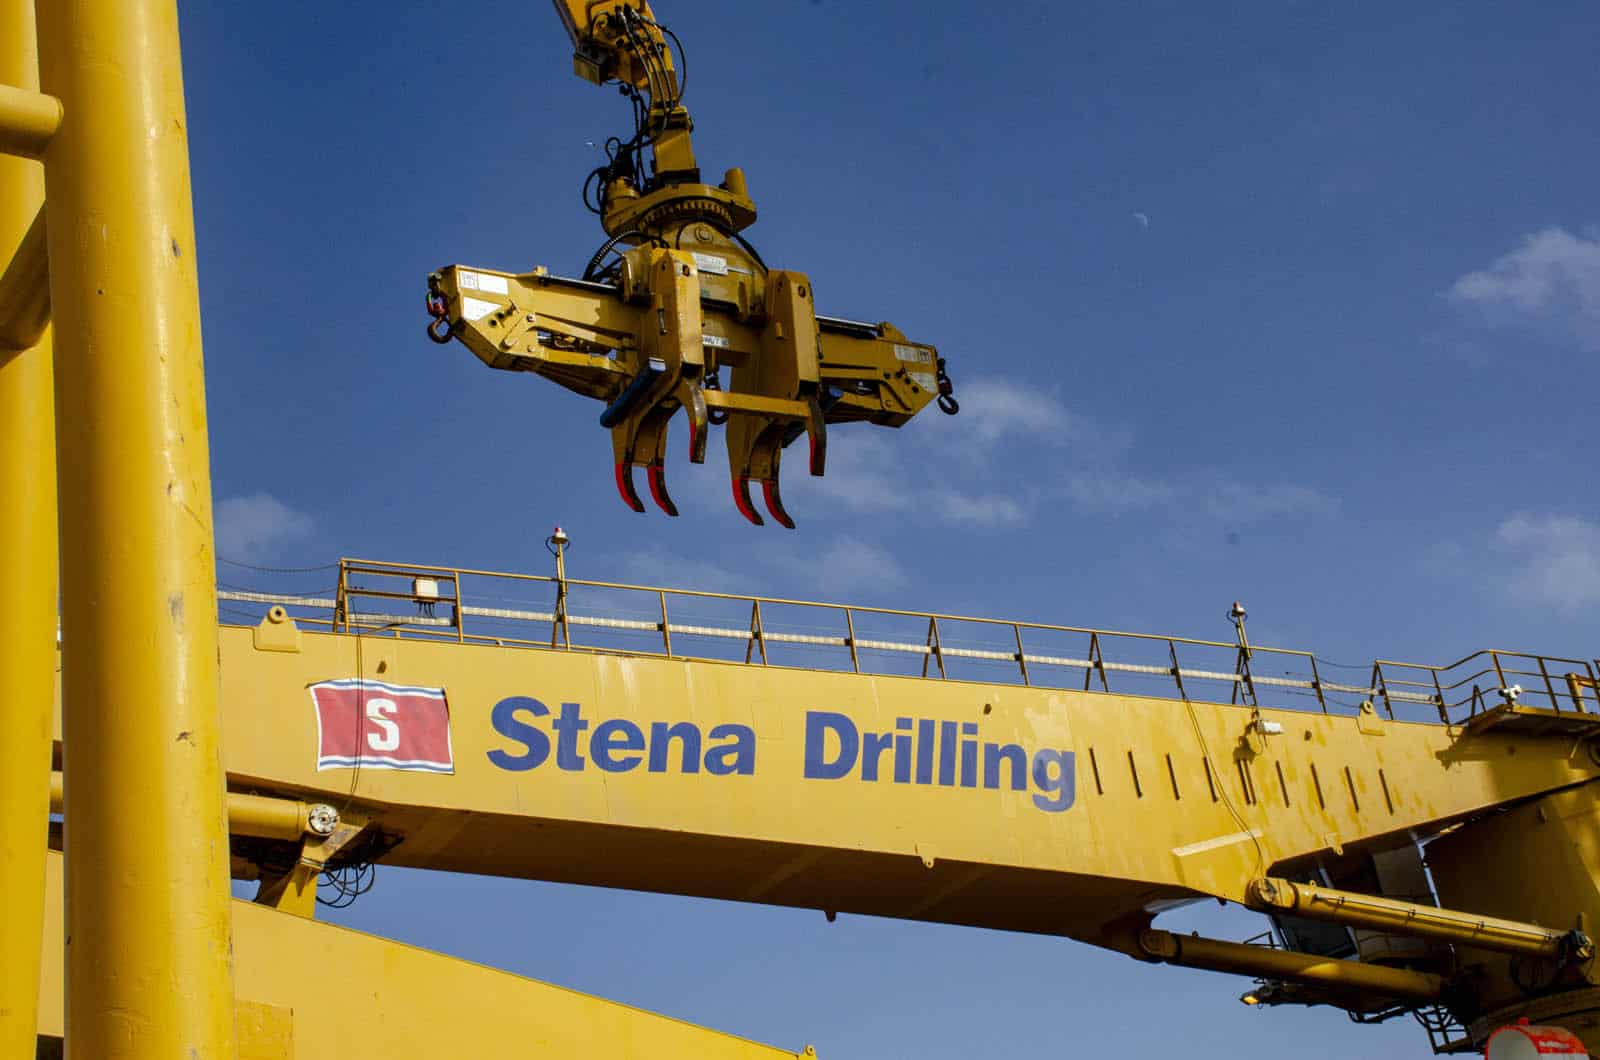 Stena Drilling label and a lifting machine